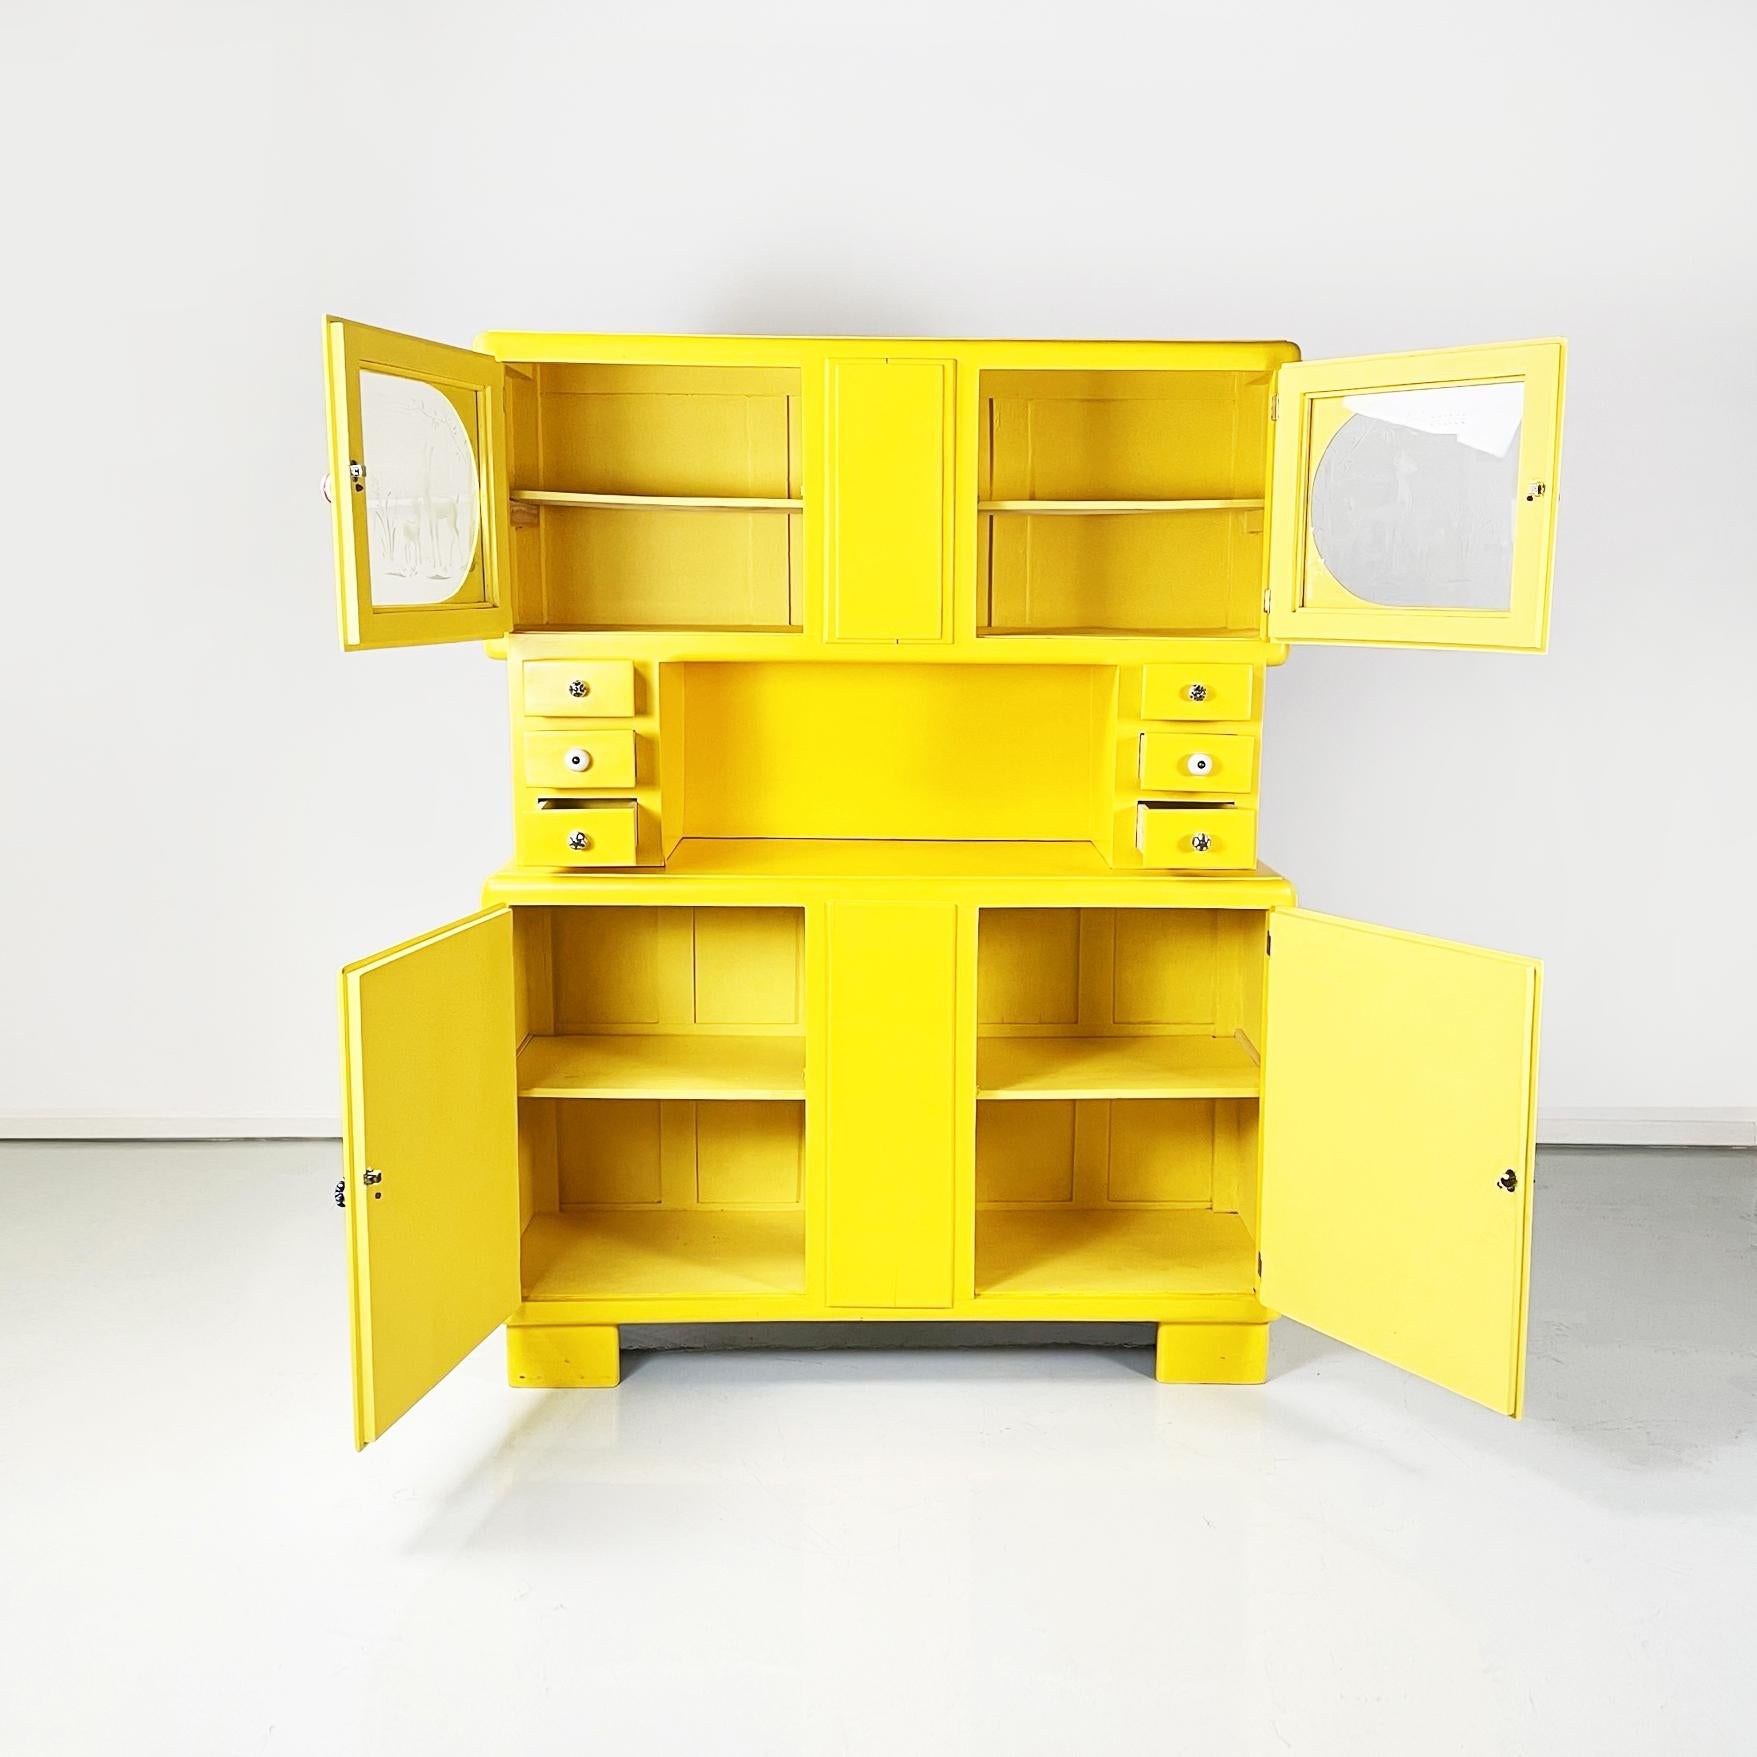 Italian mid-century Double body chest of drawers in bright yellow wood, 1960s.
 Double body chest of drawers in bright yellow painted wood. In the upper part there are two glass doors with a wooden frame, on which two fawns are painted. Internal